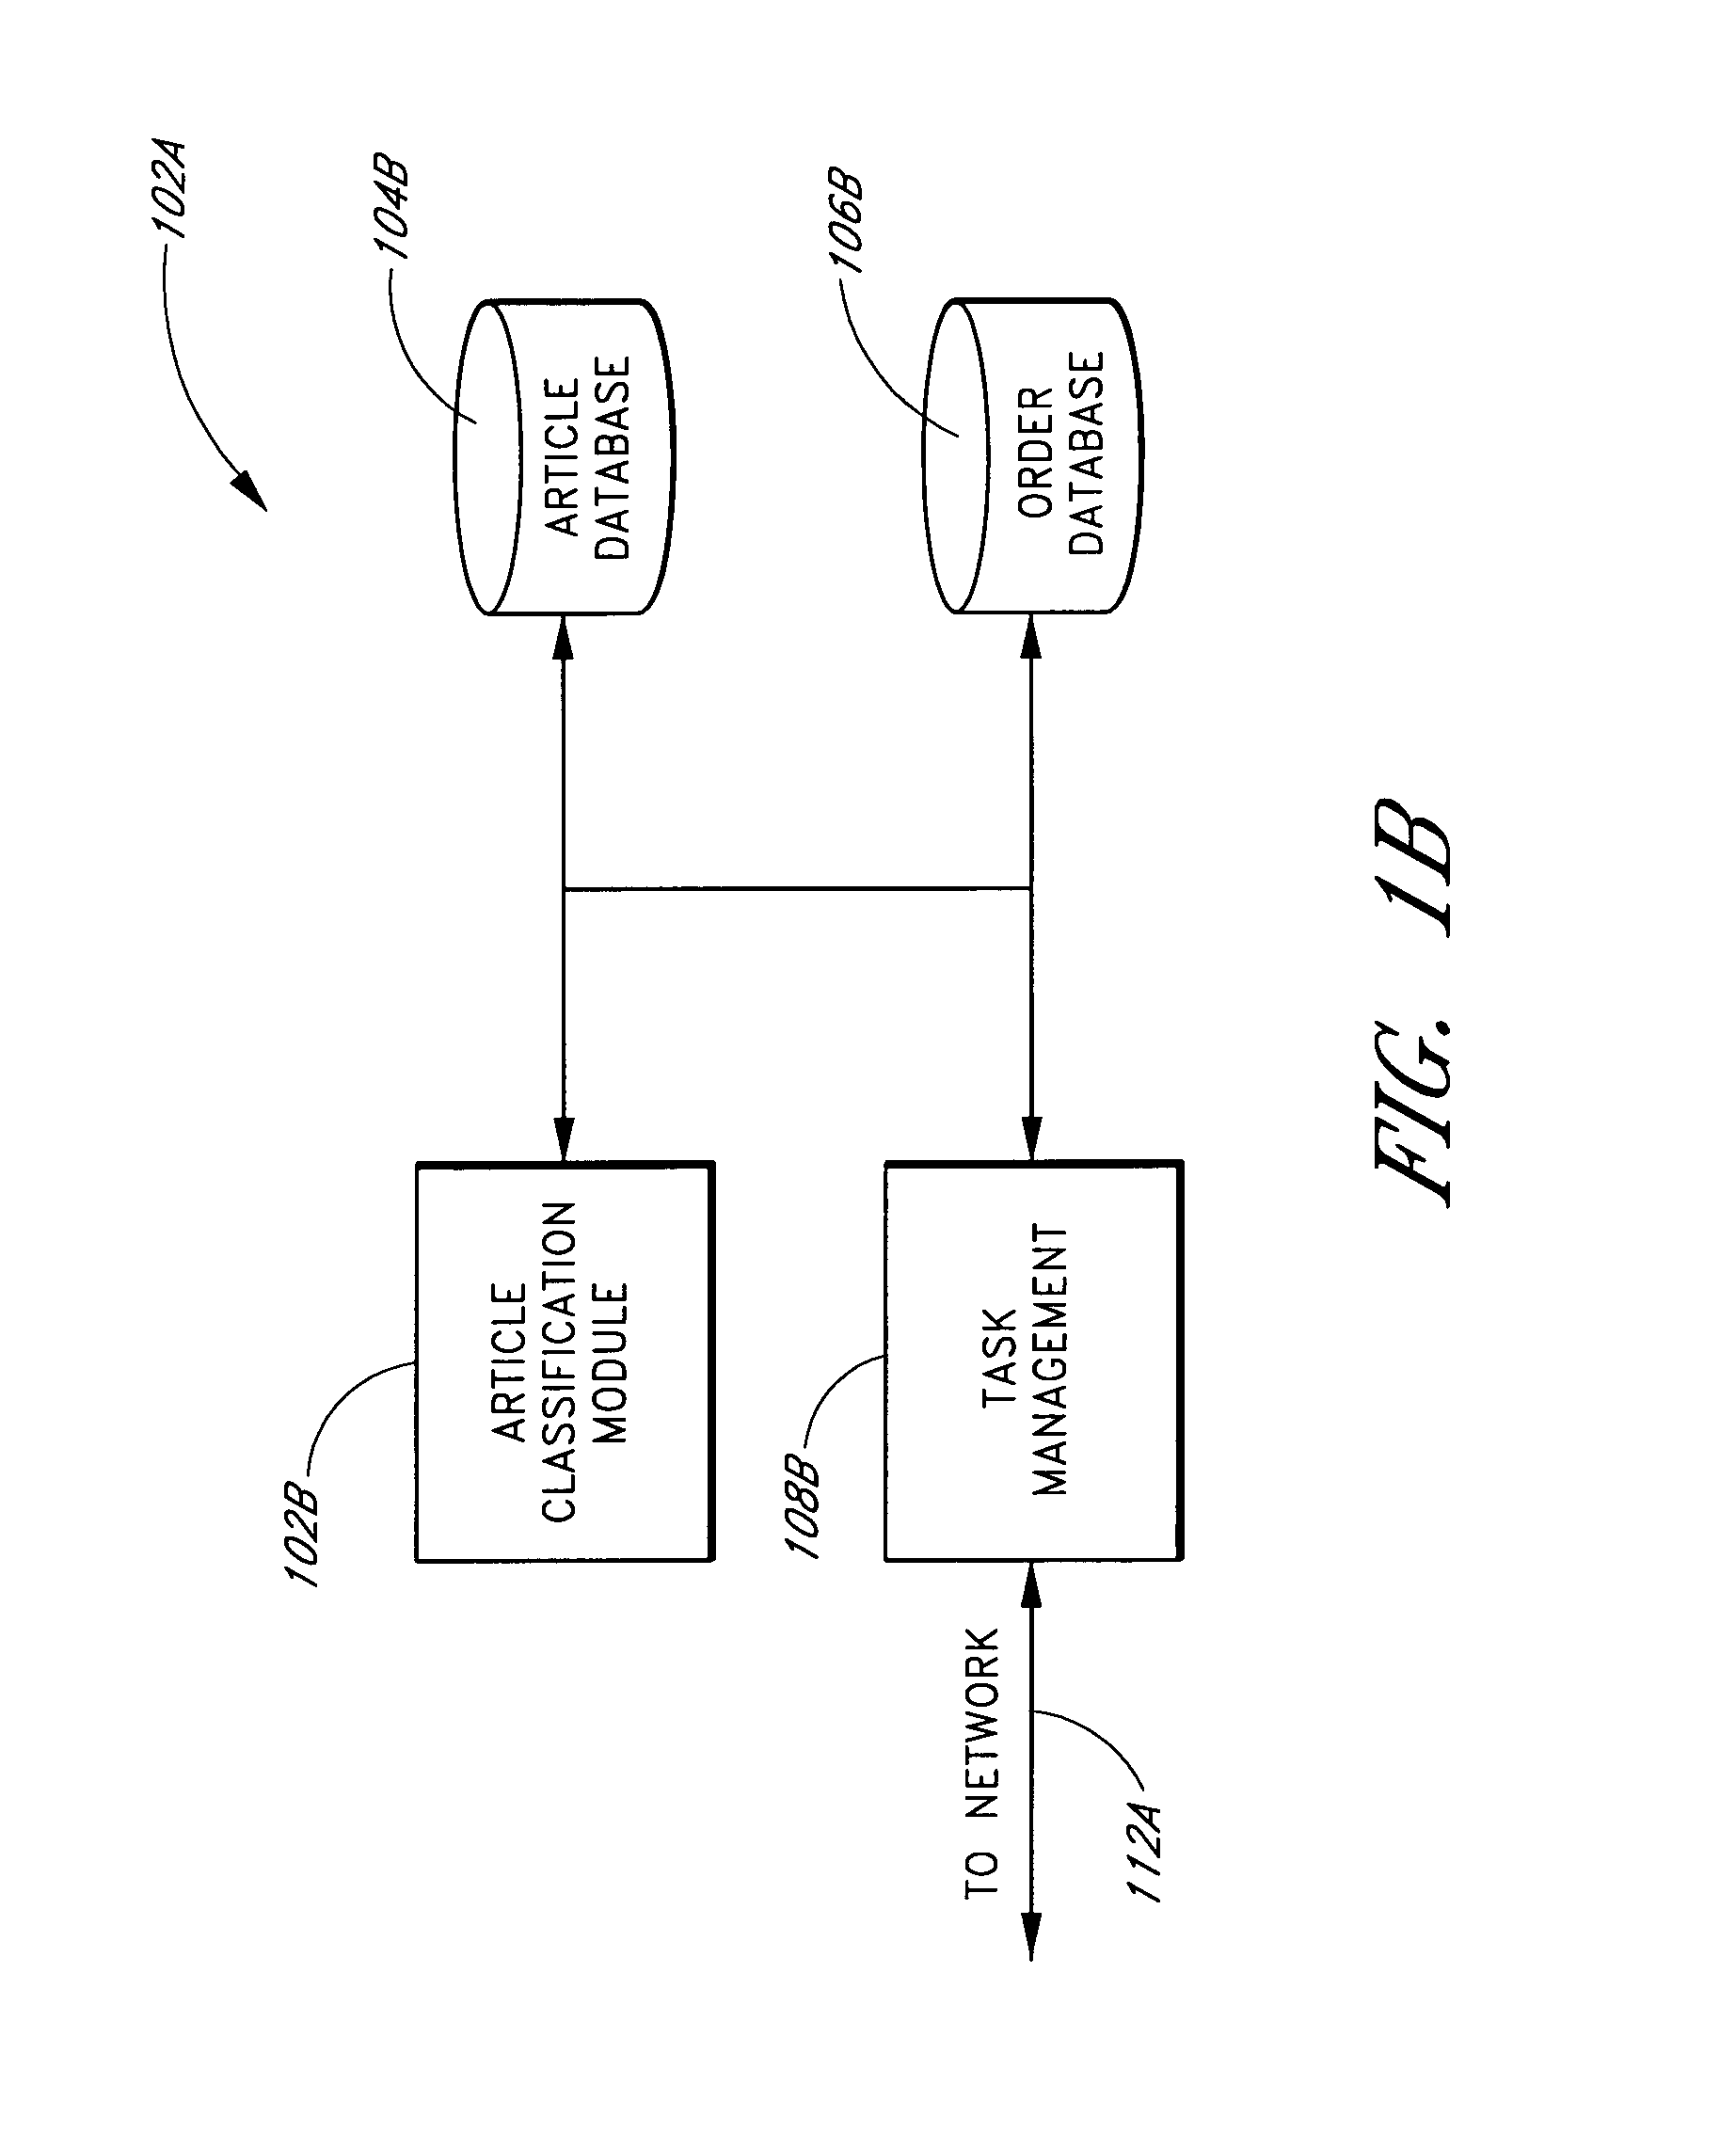 Computer controlled article classification and processing system